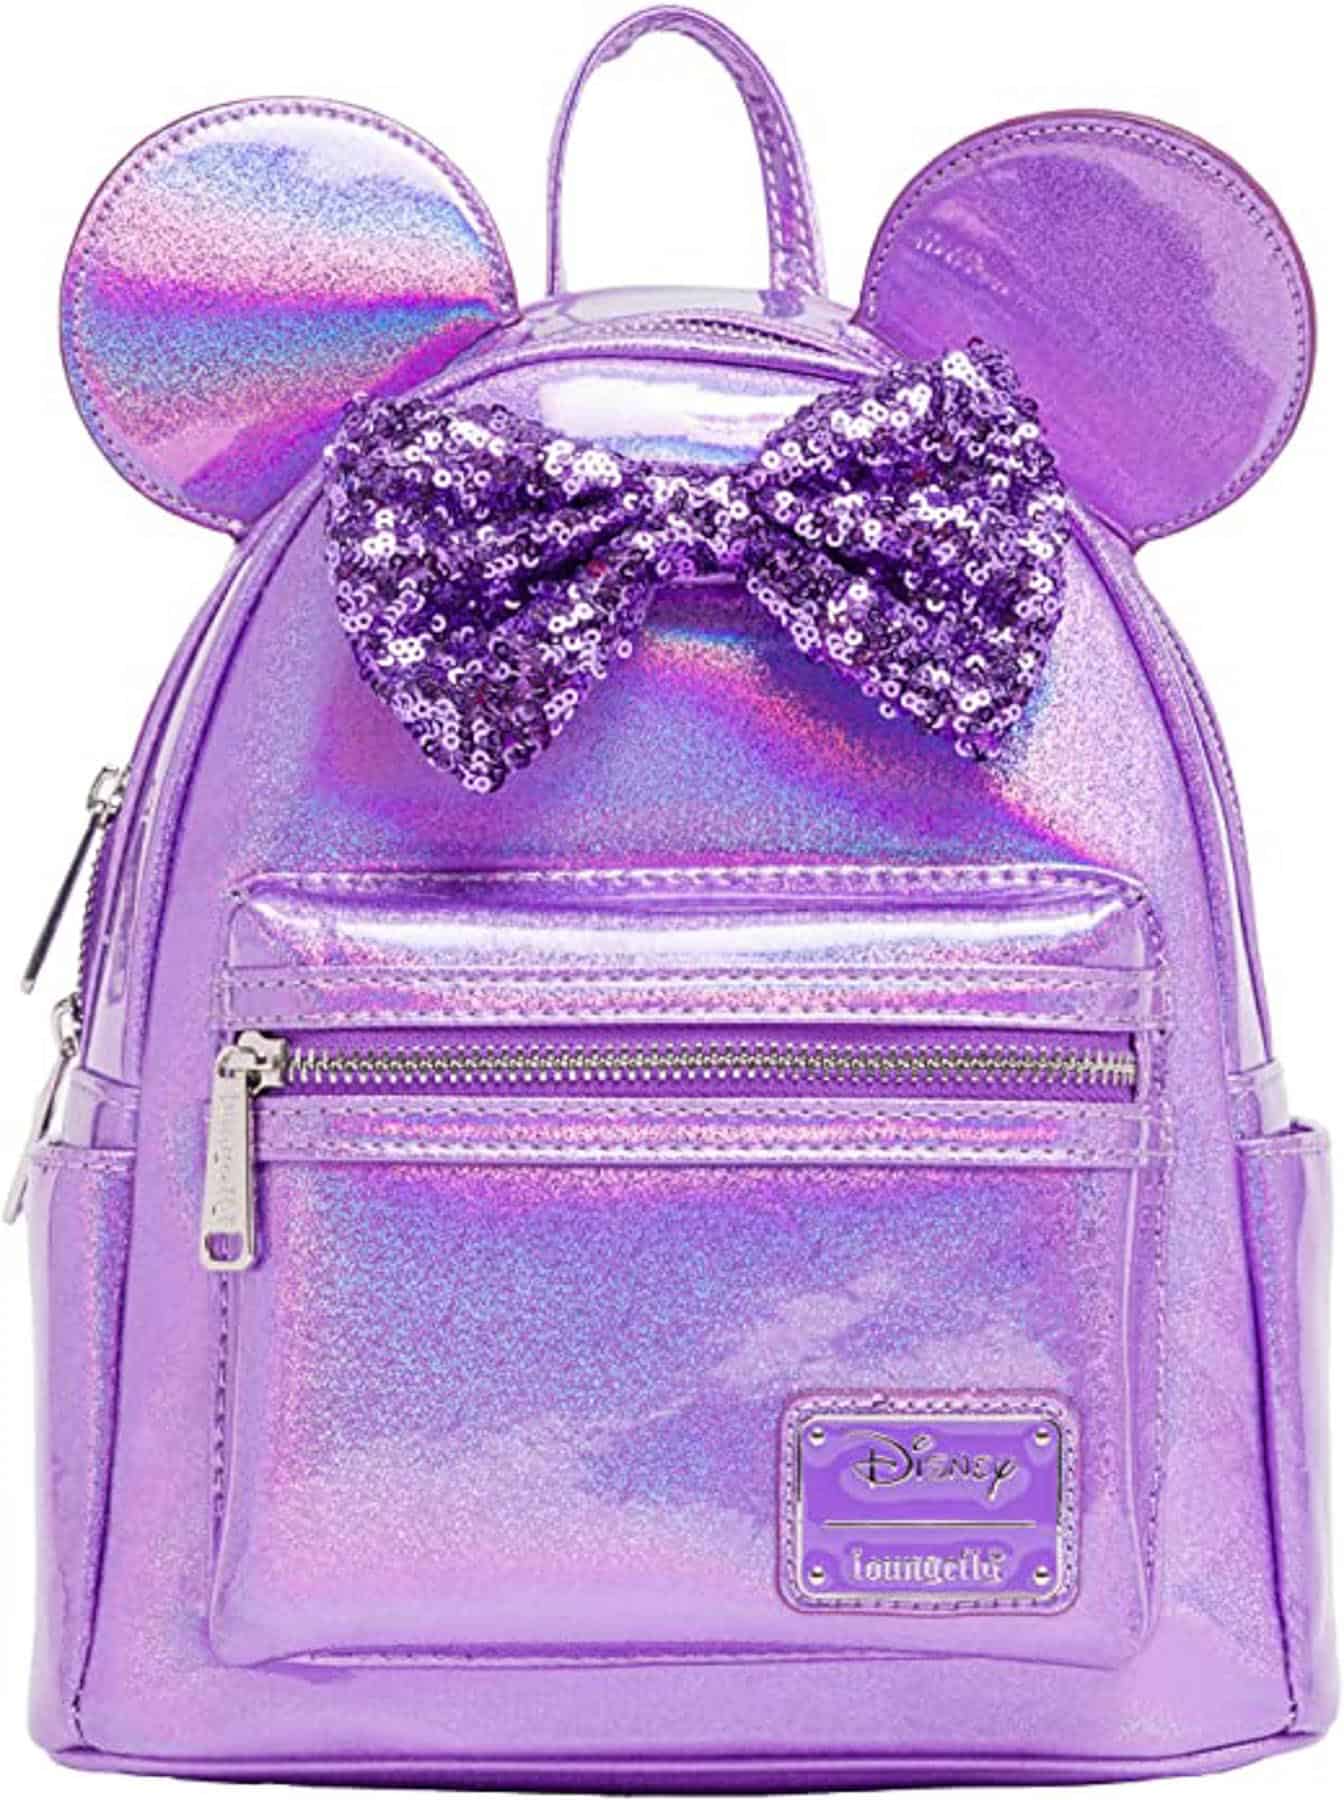 Please help! Looking for a similar backpack with black base like the Chibi  Ursula back pack : r/Loungefly